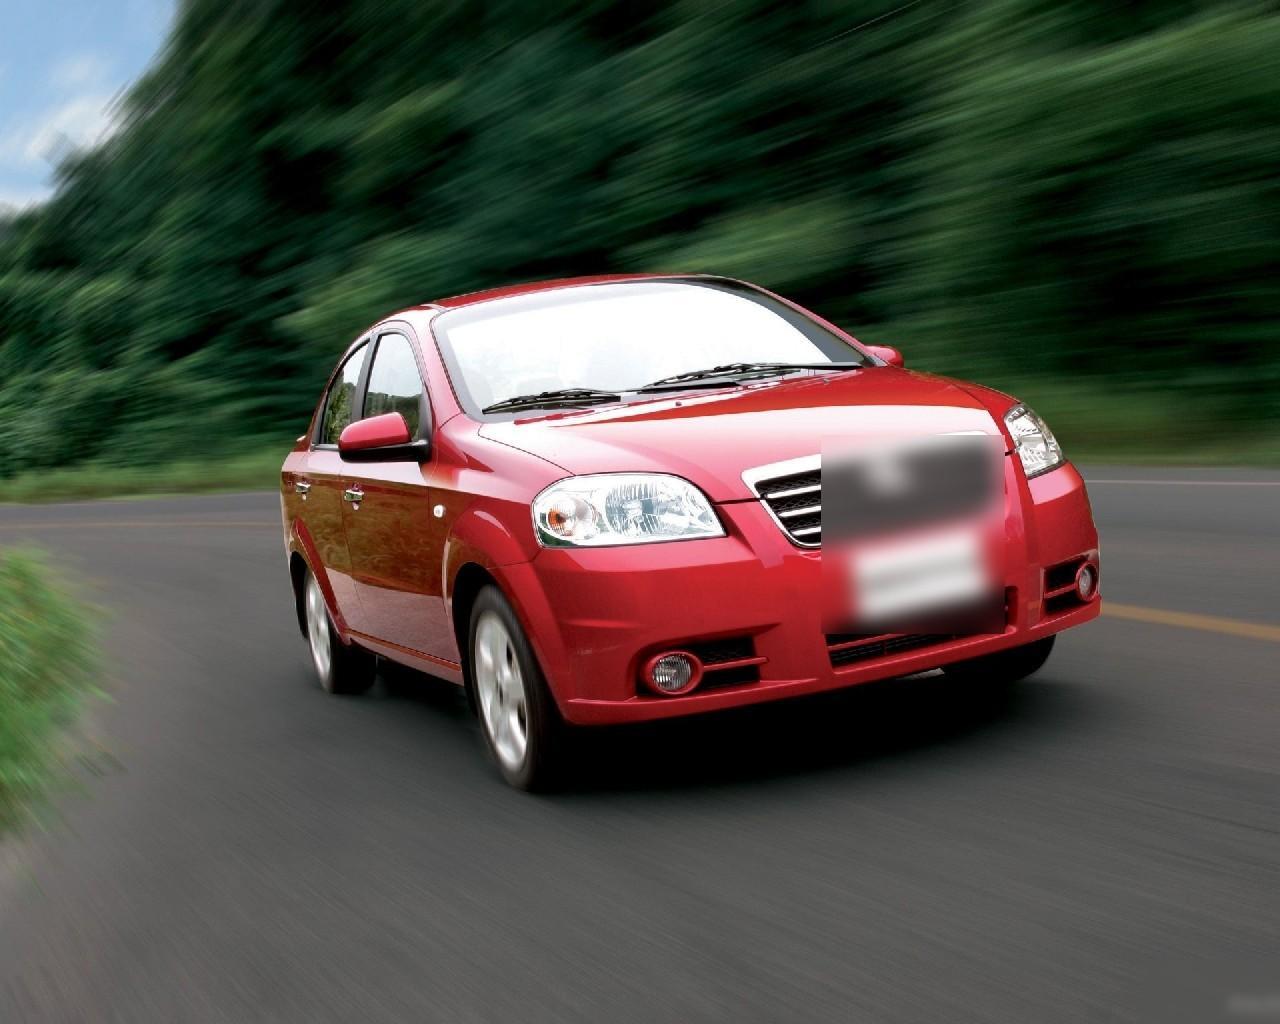 New HD Wallpaper Daewoo Cars For Android Apk